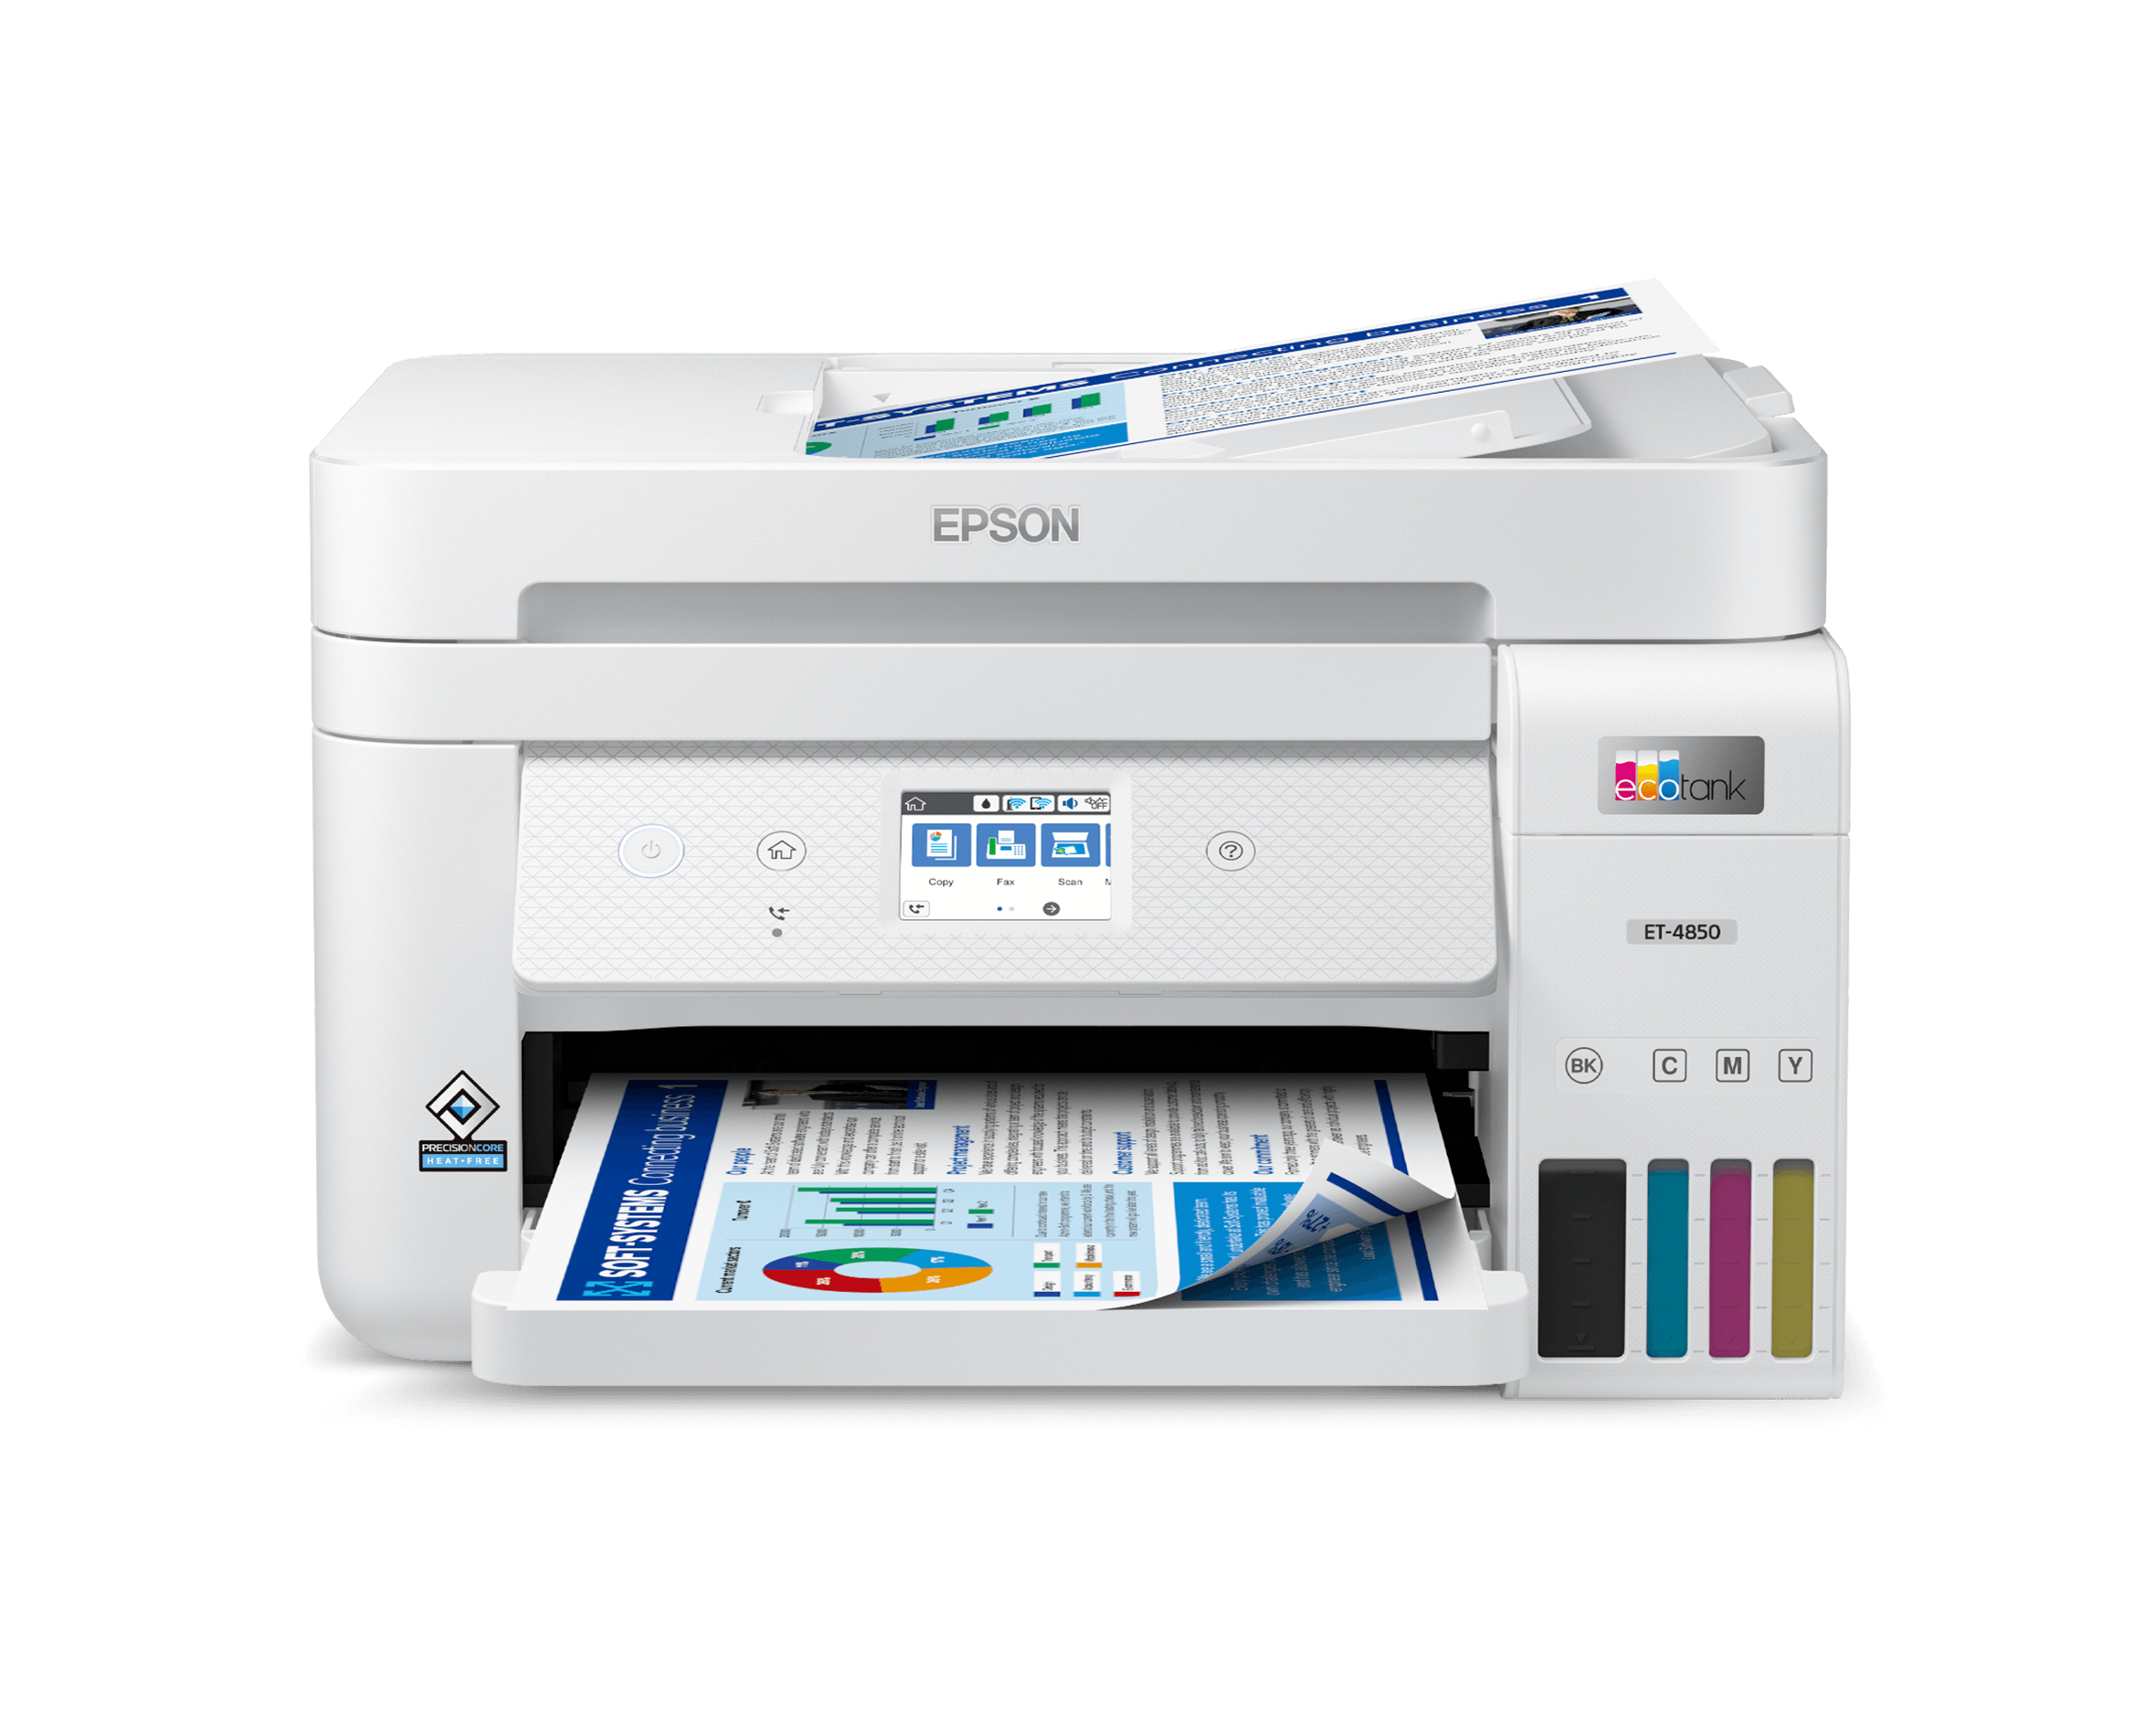 Epson EcoTank ET-2721 Printer with Tanks, Multifunctional 3-in-1:  Printer/Scanner/Copier, A4, Color Inkjet, Wifi Direct, Ink Kit Included,  Screen, Low Cost Per Page, Compact : : Electronics